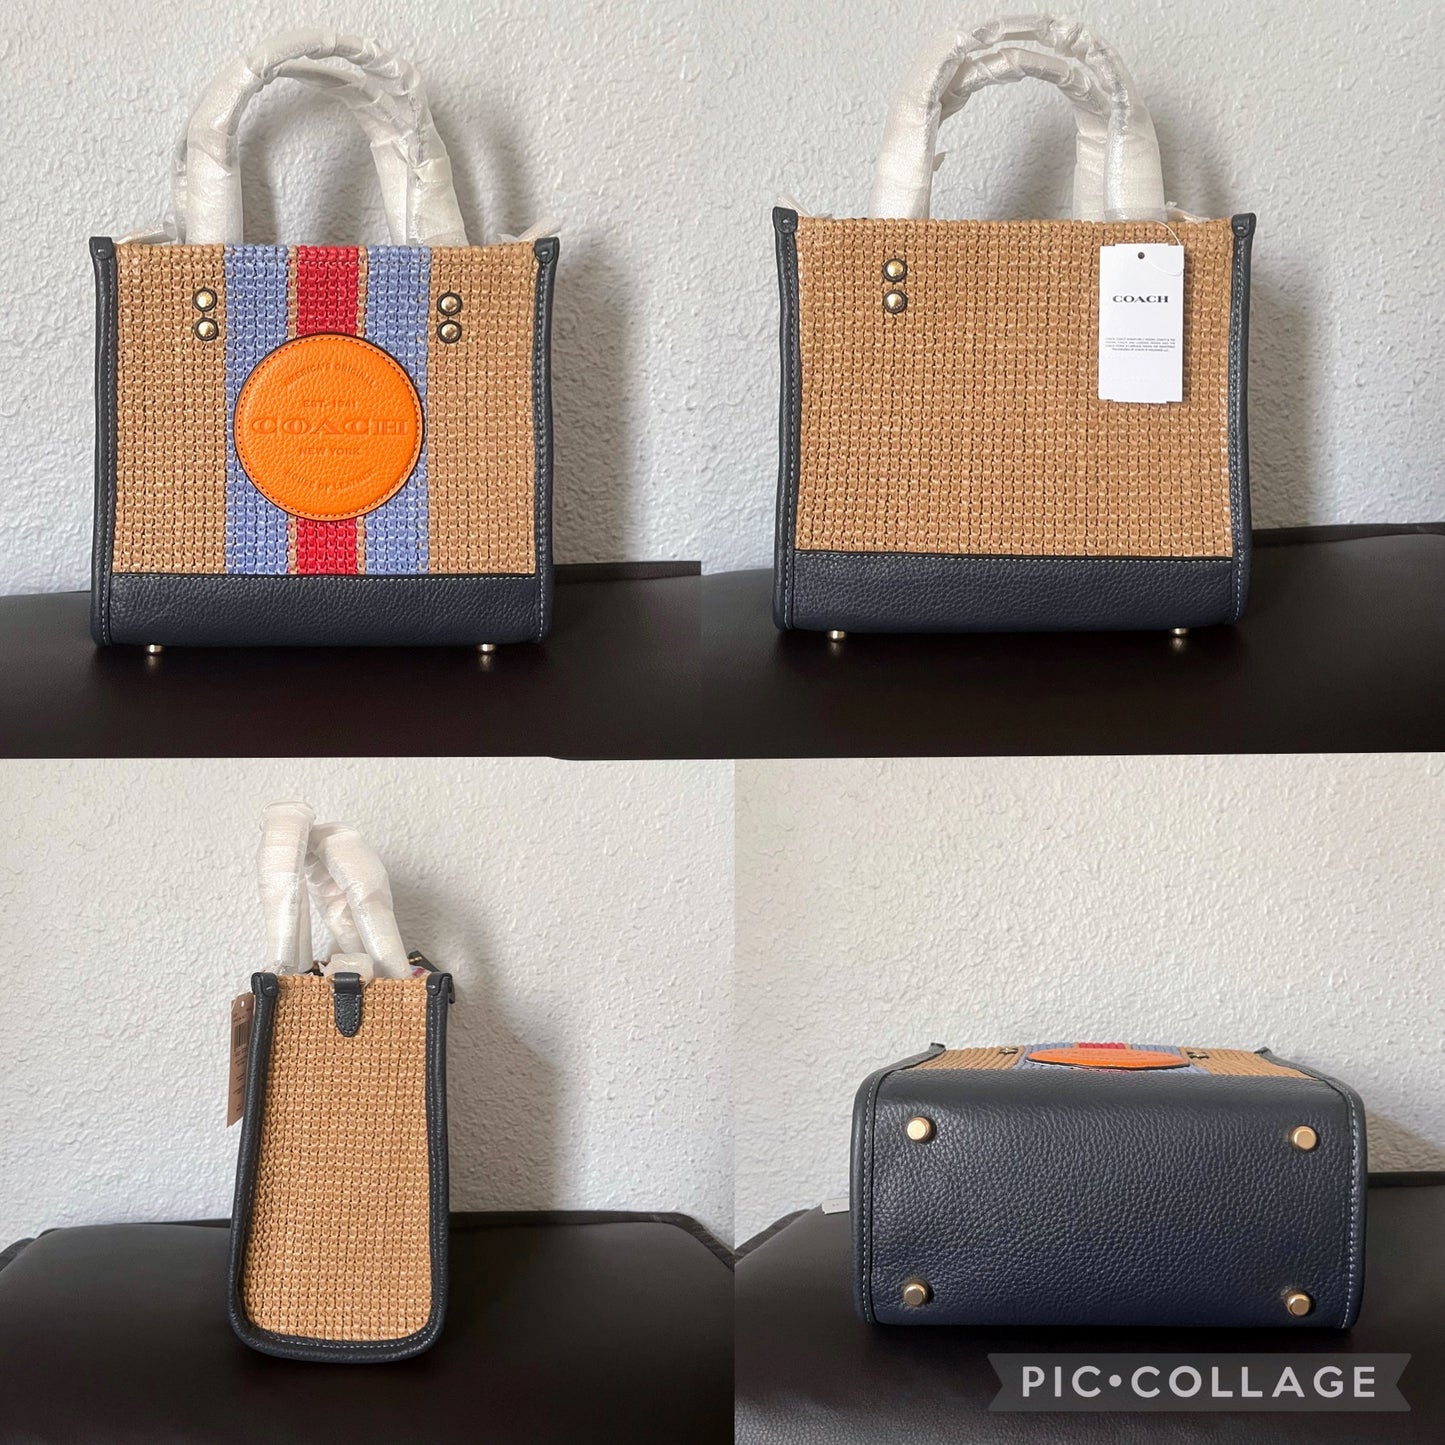 Coach Dempsey Tote 22 With Coach Patch